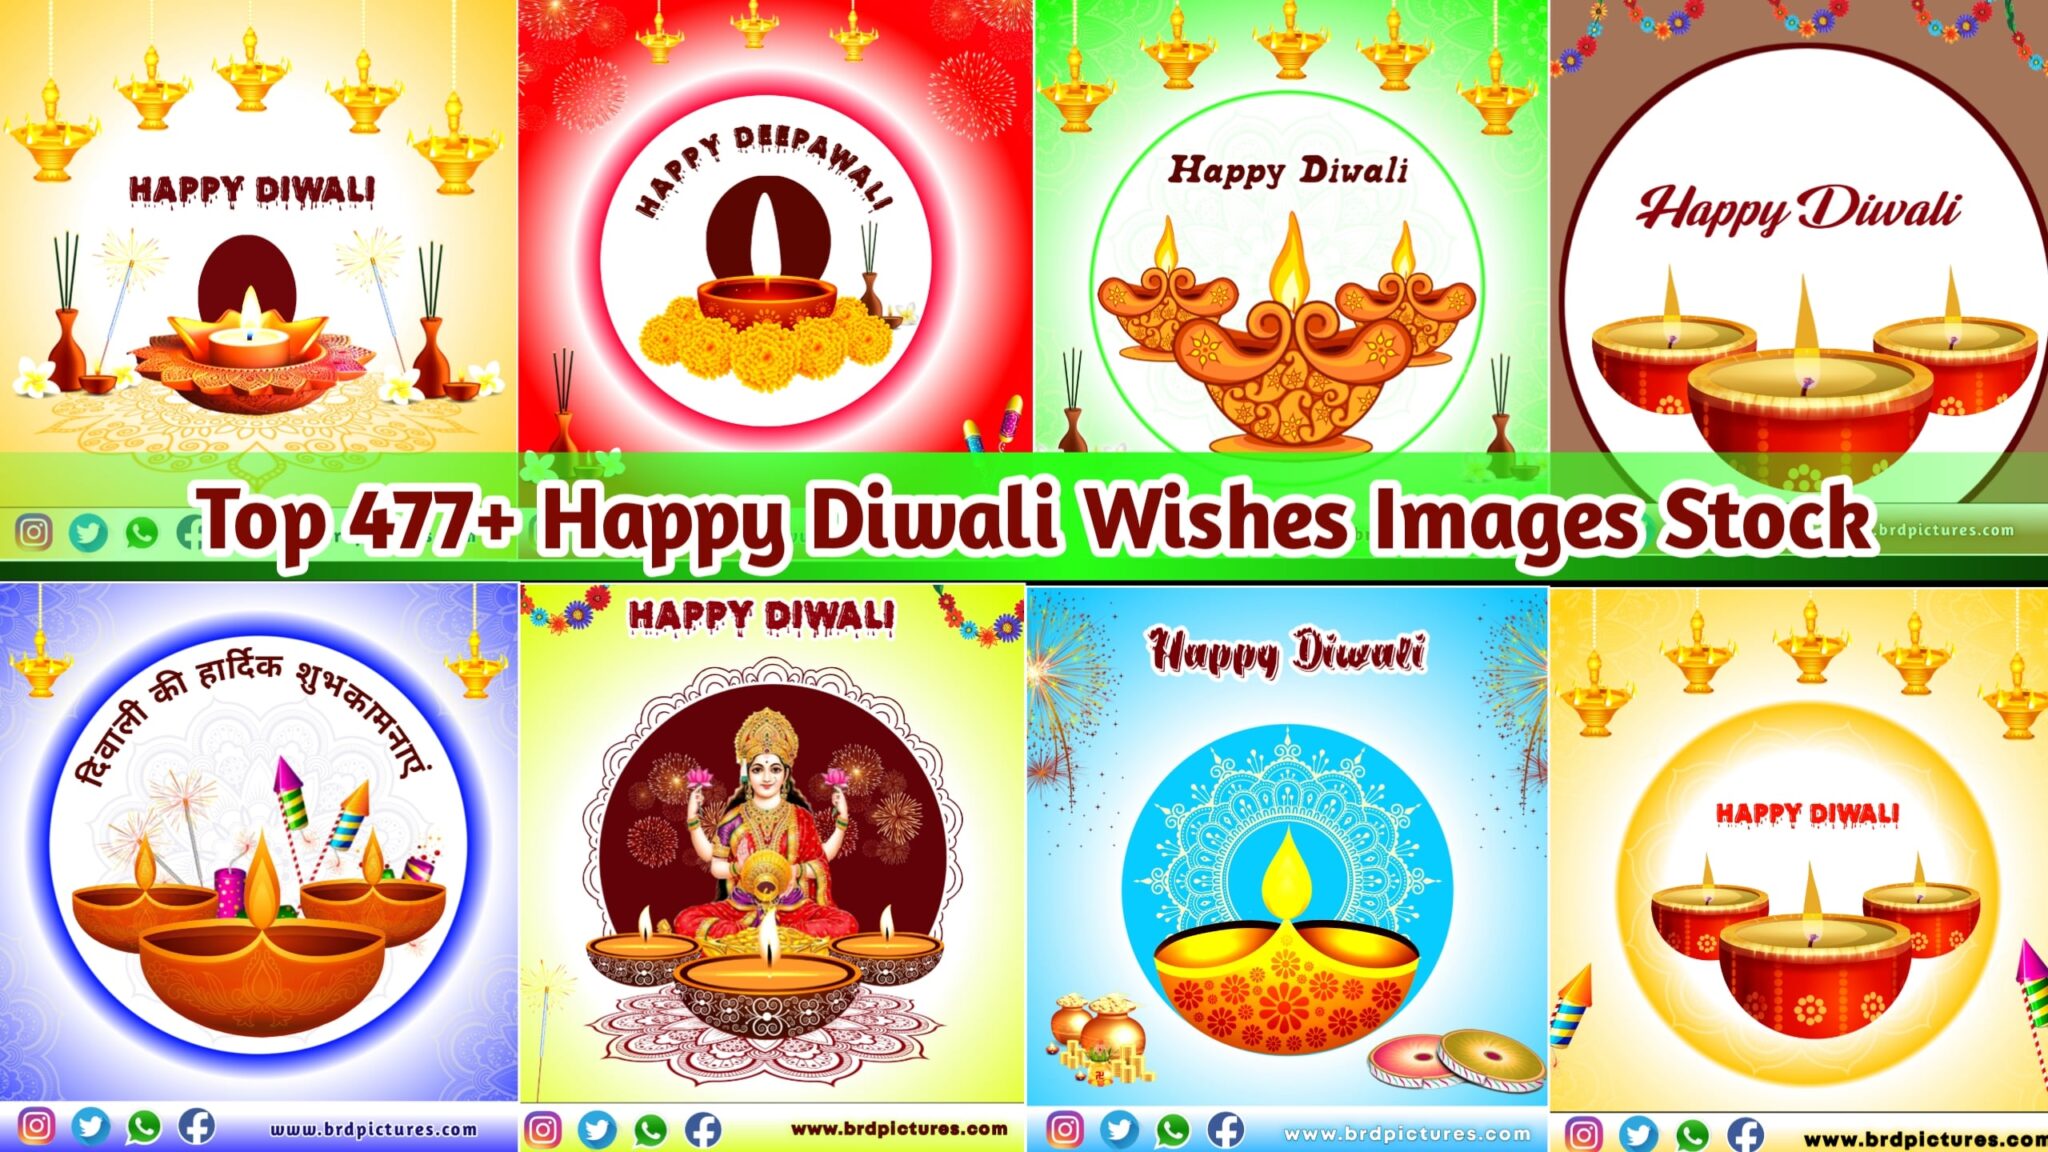 Top 477+ Happy Diwali Wishes Images HD Stock